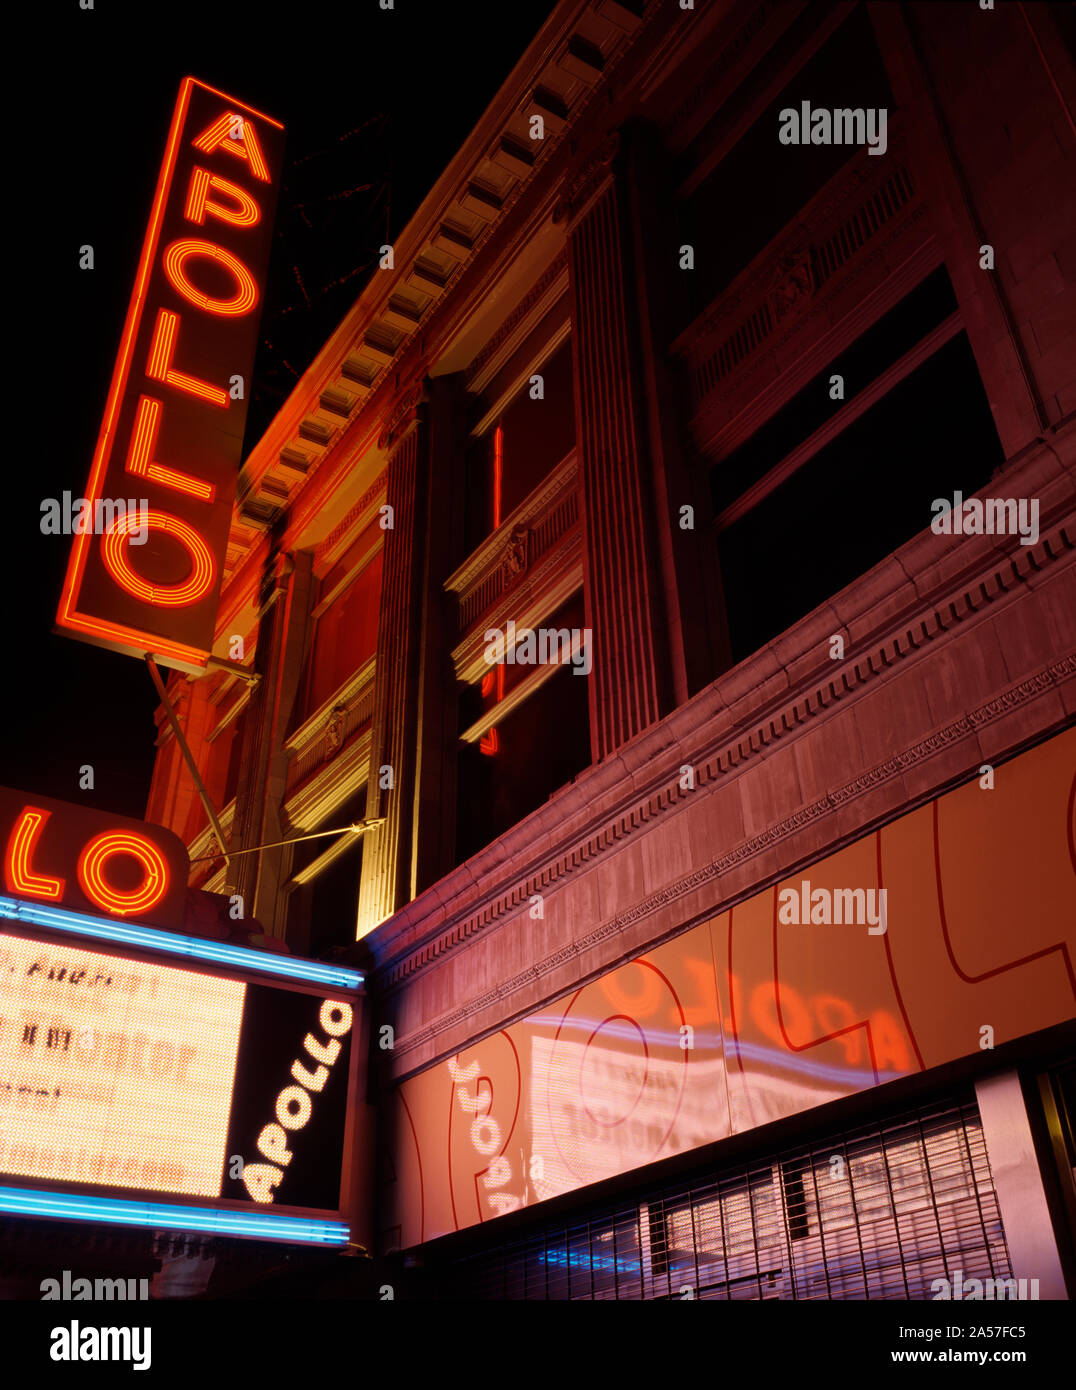 Low Angle View Of A Theatre Lit Up At Night Apollo Theater Harlem Manhattan New York City New York State Usa Stock Photo Alamy